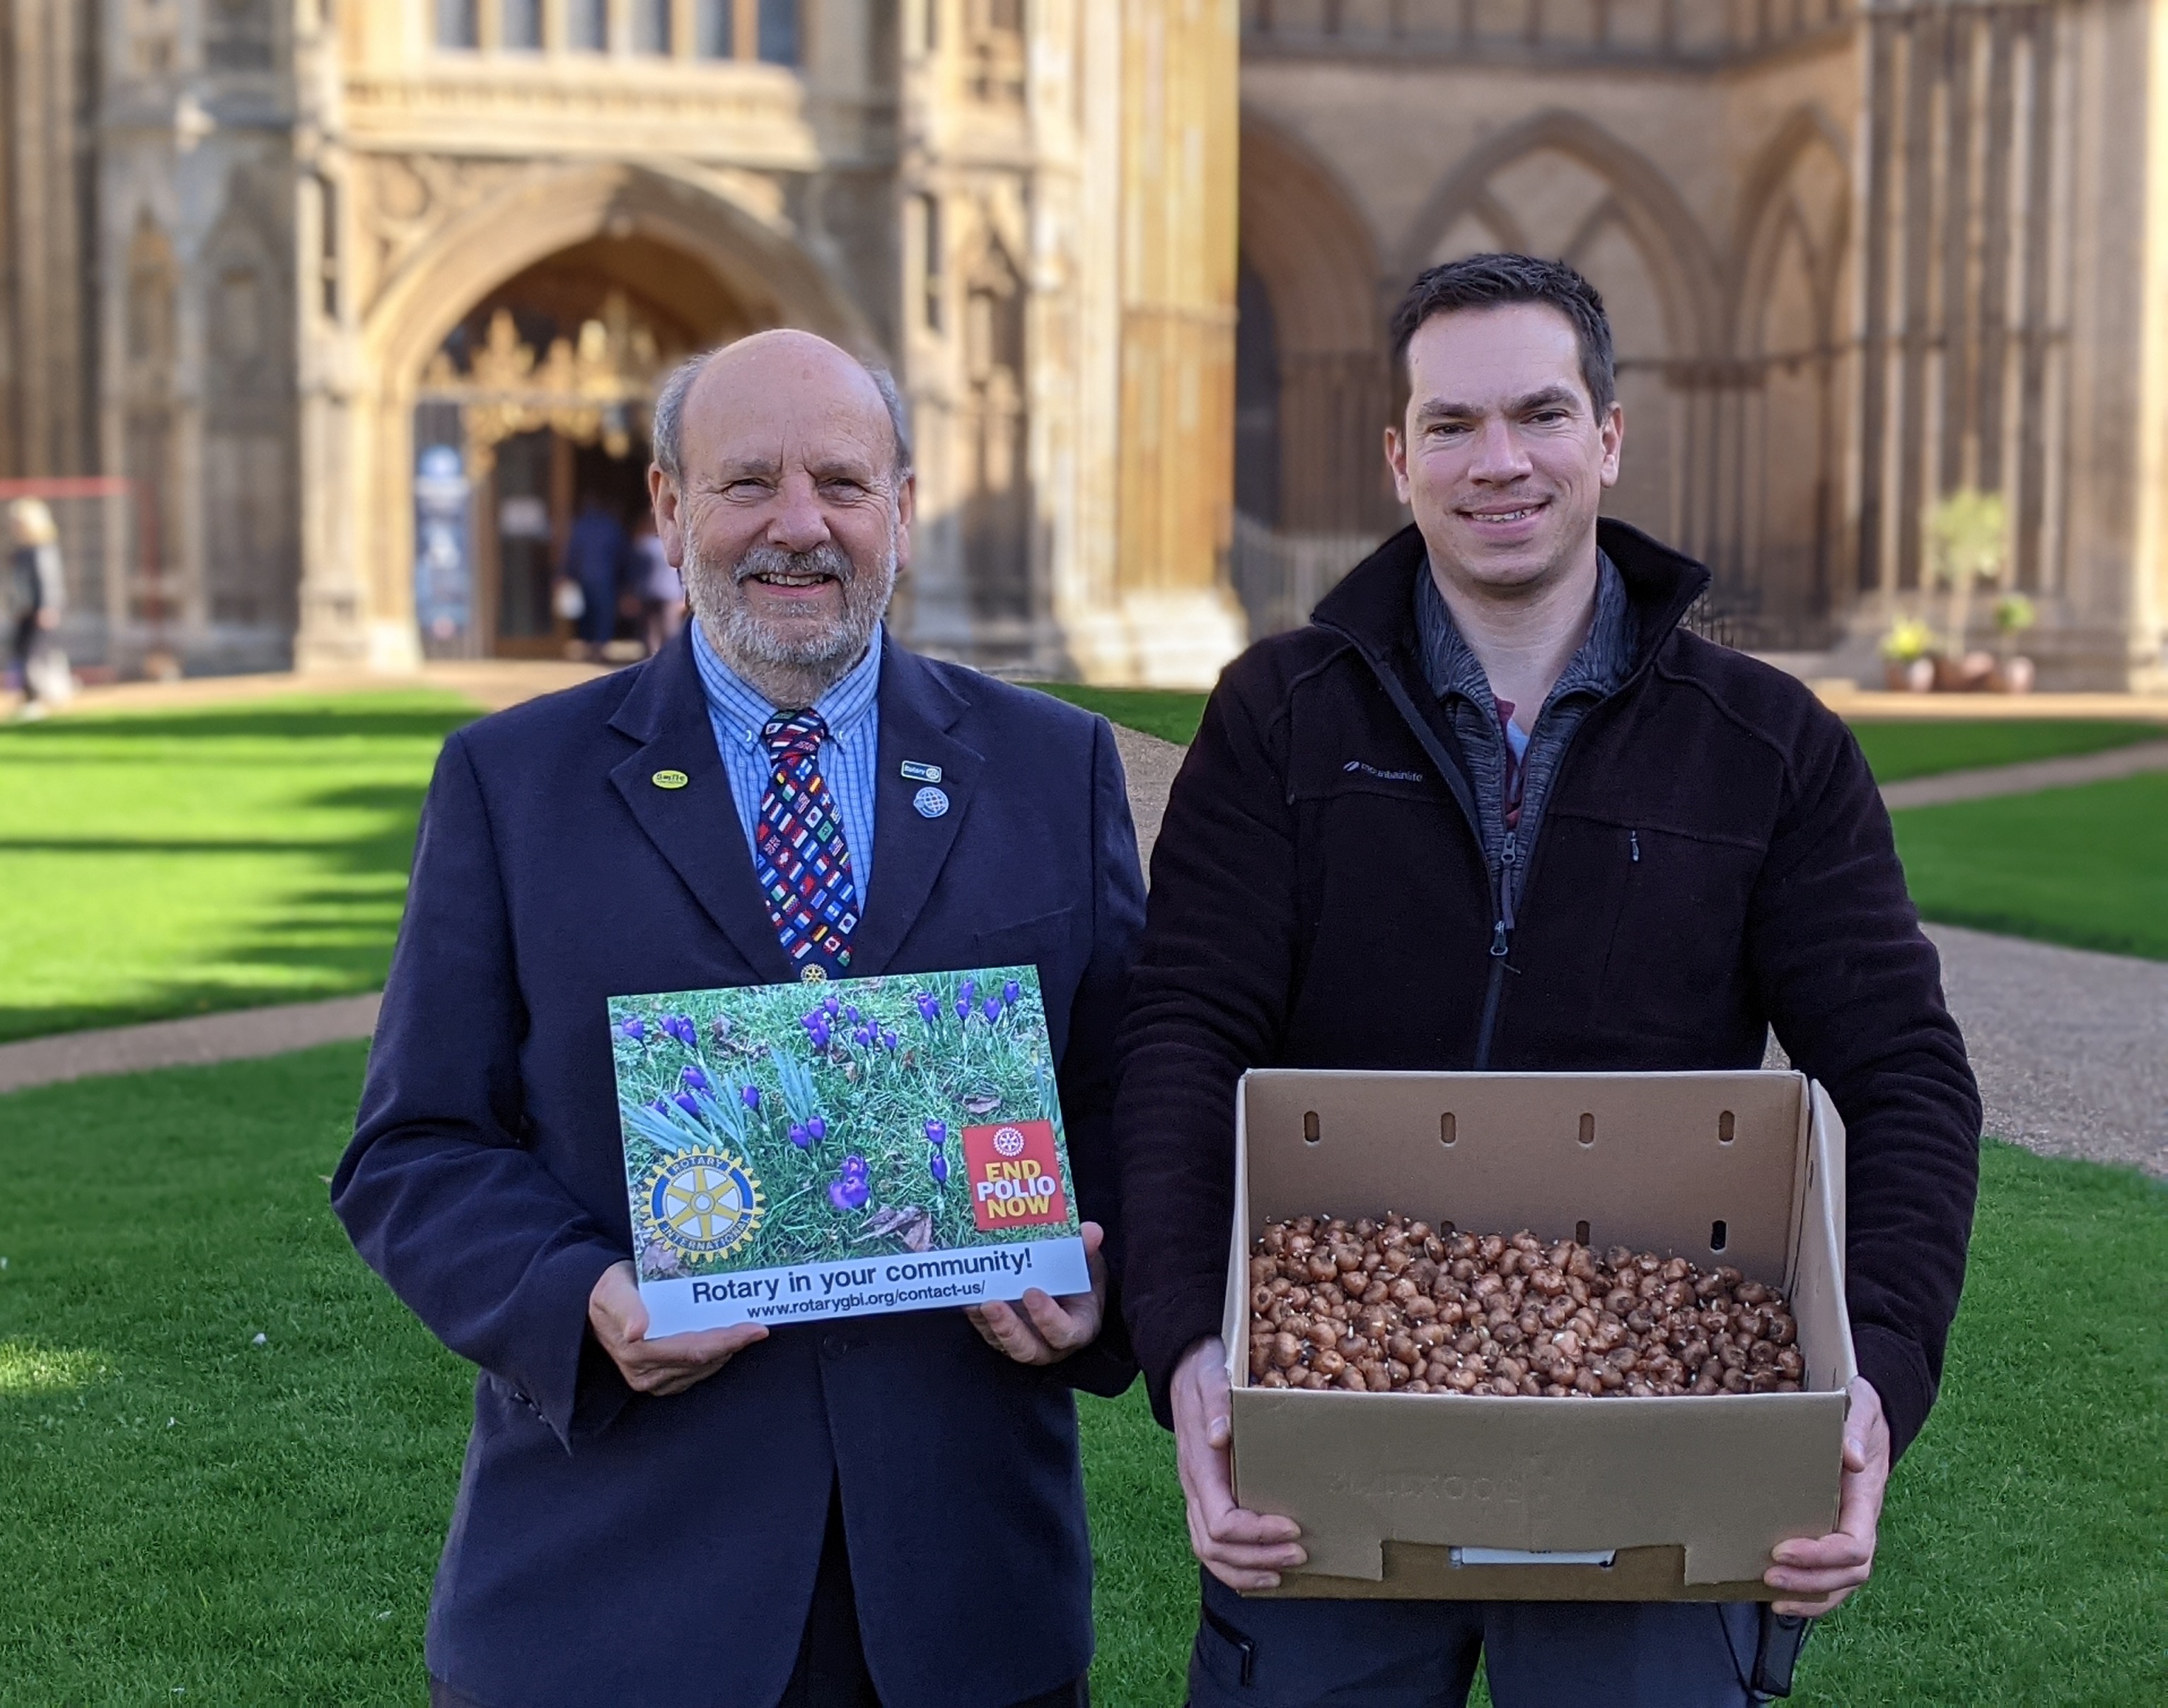 1500 purple crocus bulbs presented by Peterborough Ortons Rotary Club to Peterborough Cathedral